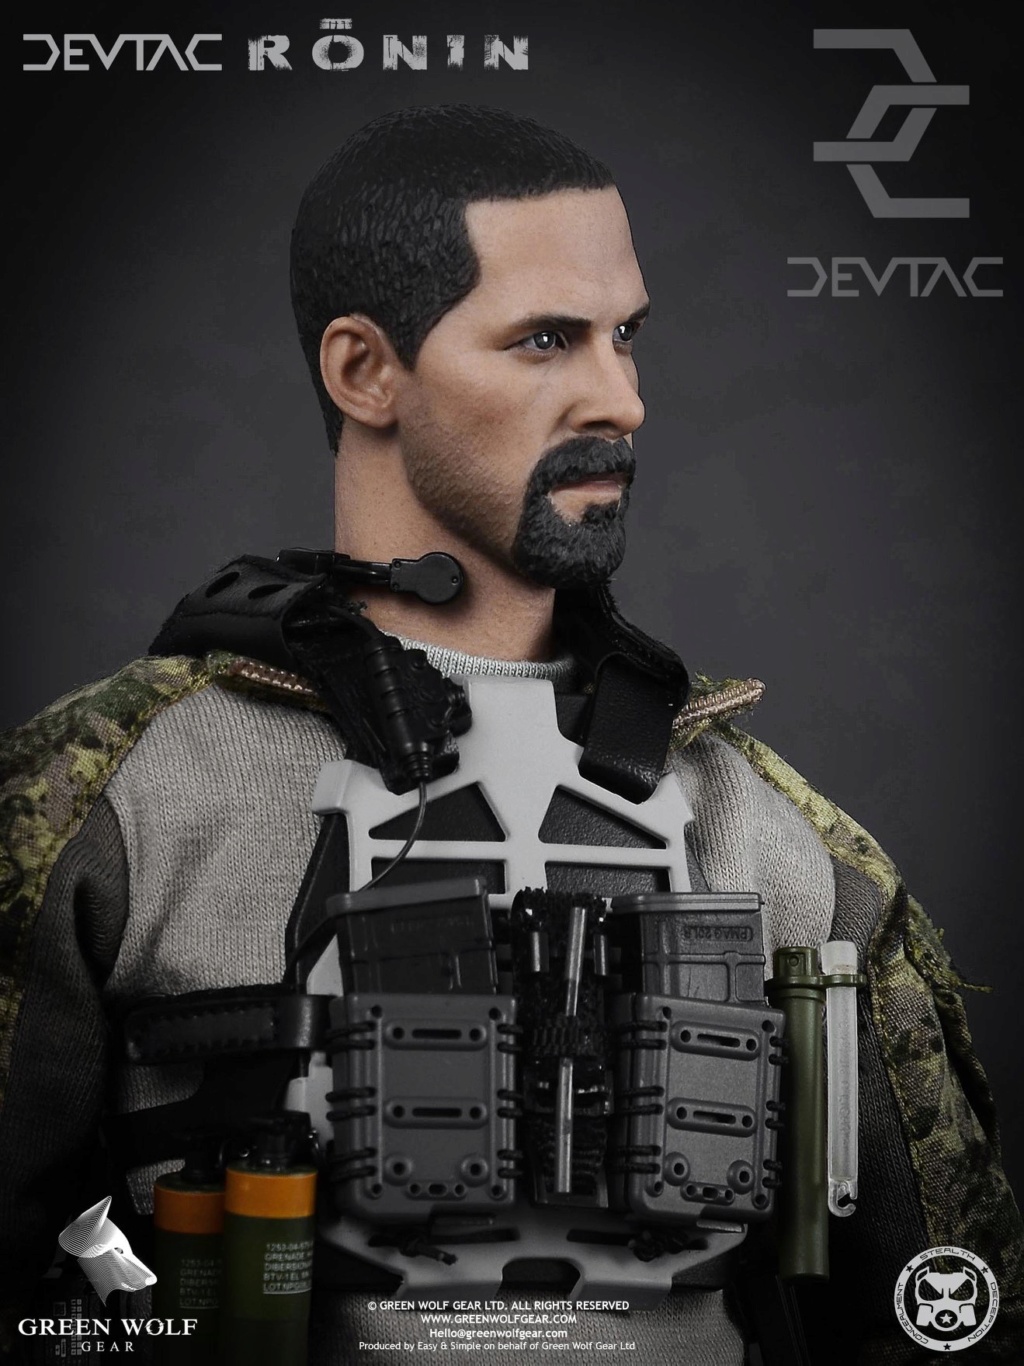 NEW PRODUCT: Green Wolf Gear DEVTAC Ronin 1/6 Action Figure (VS2434P) 2223